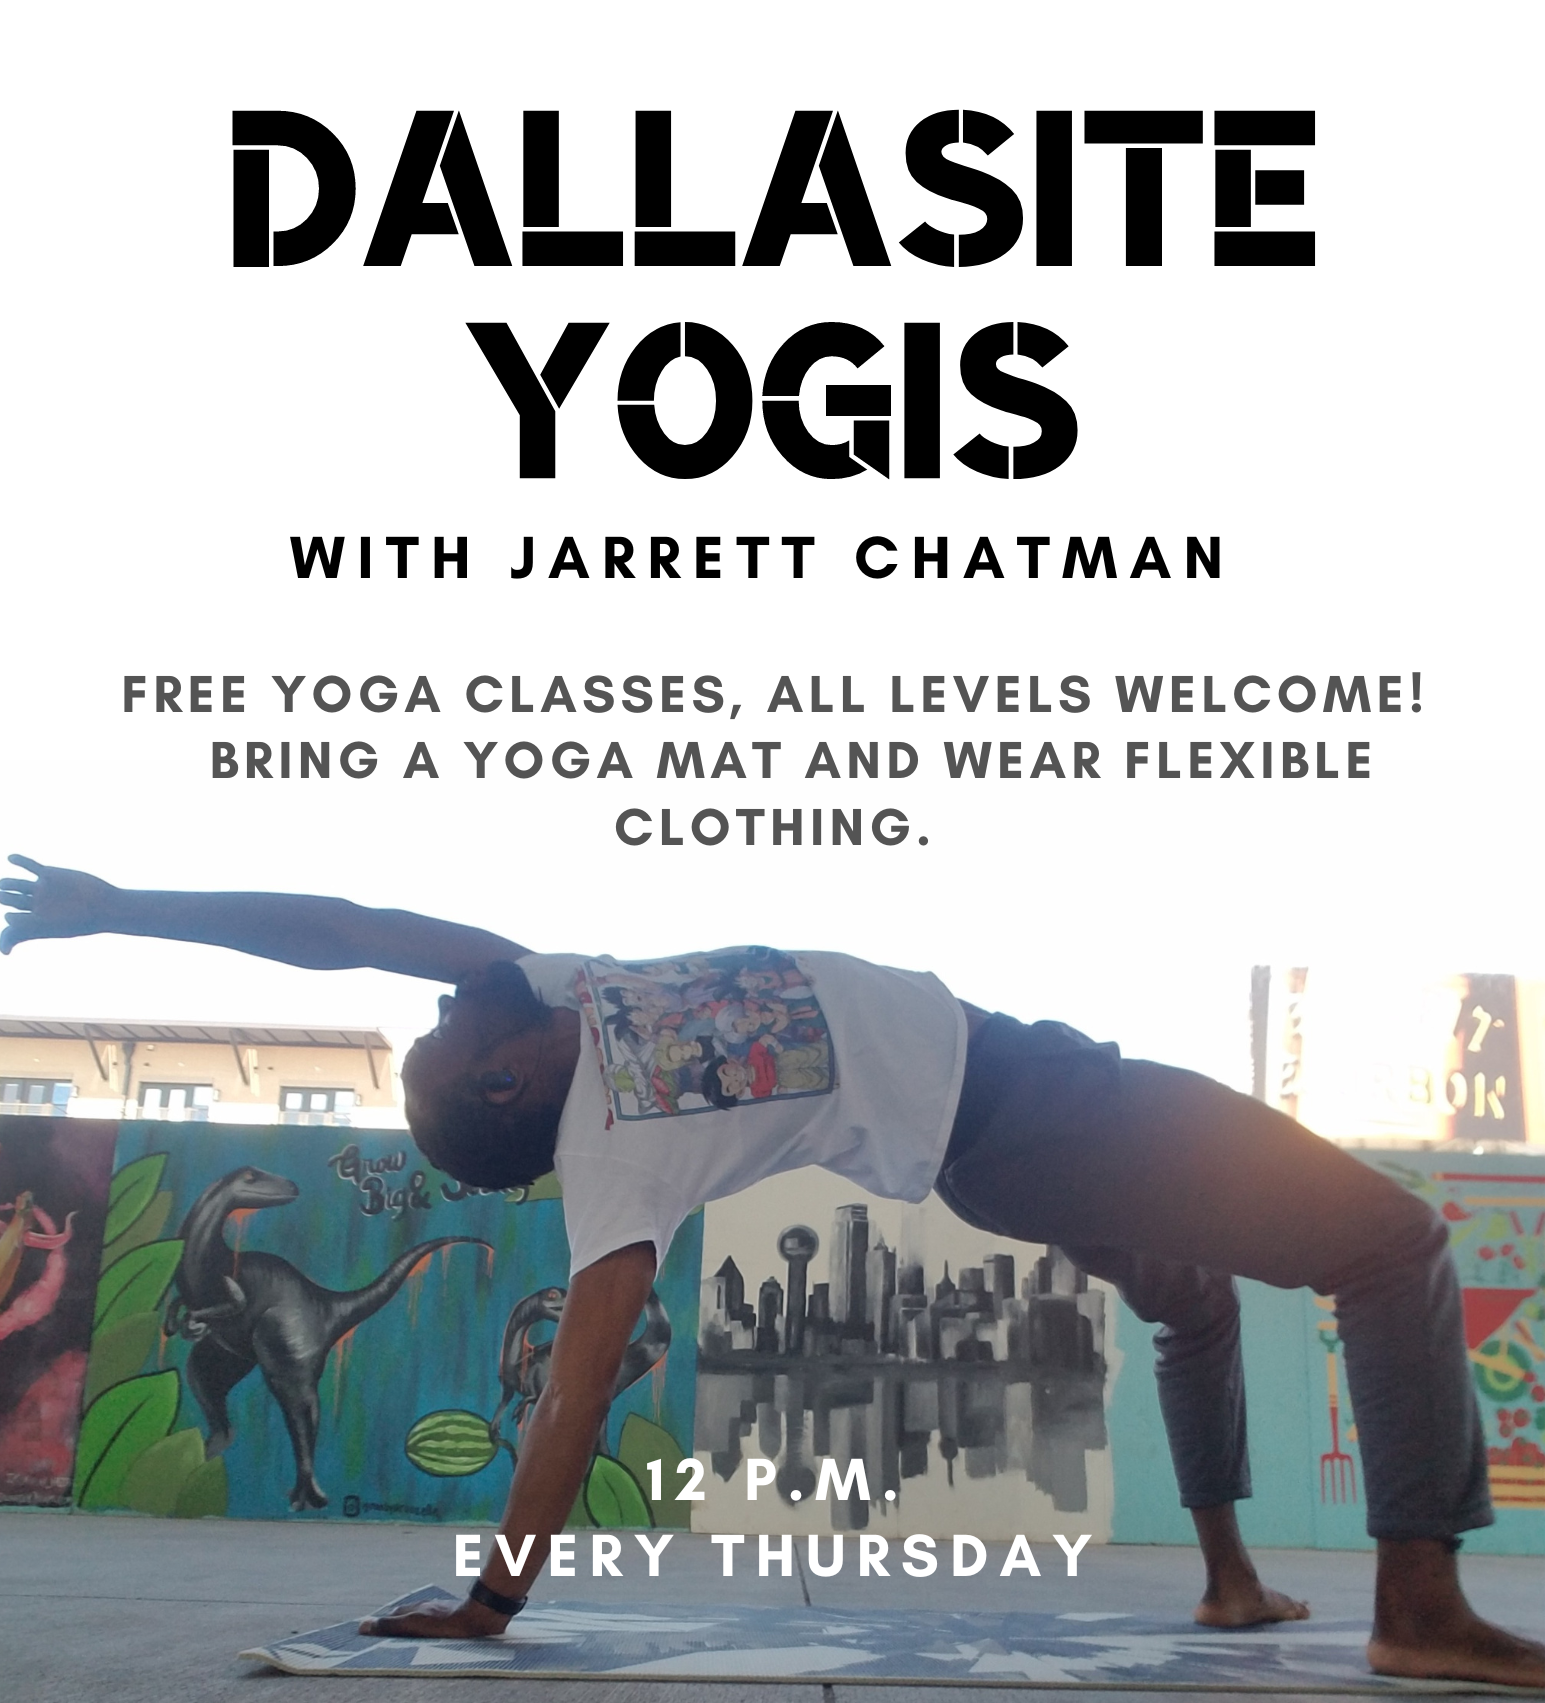 Dallasite Yogis flyer. Image of a man in a yoga pose.